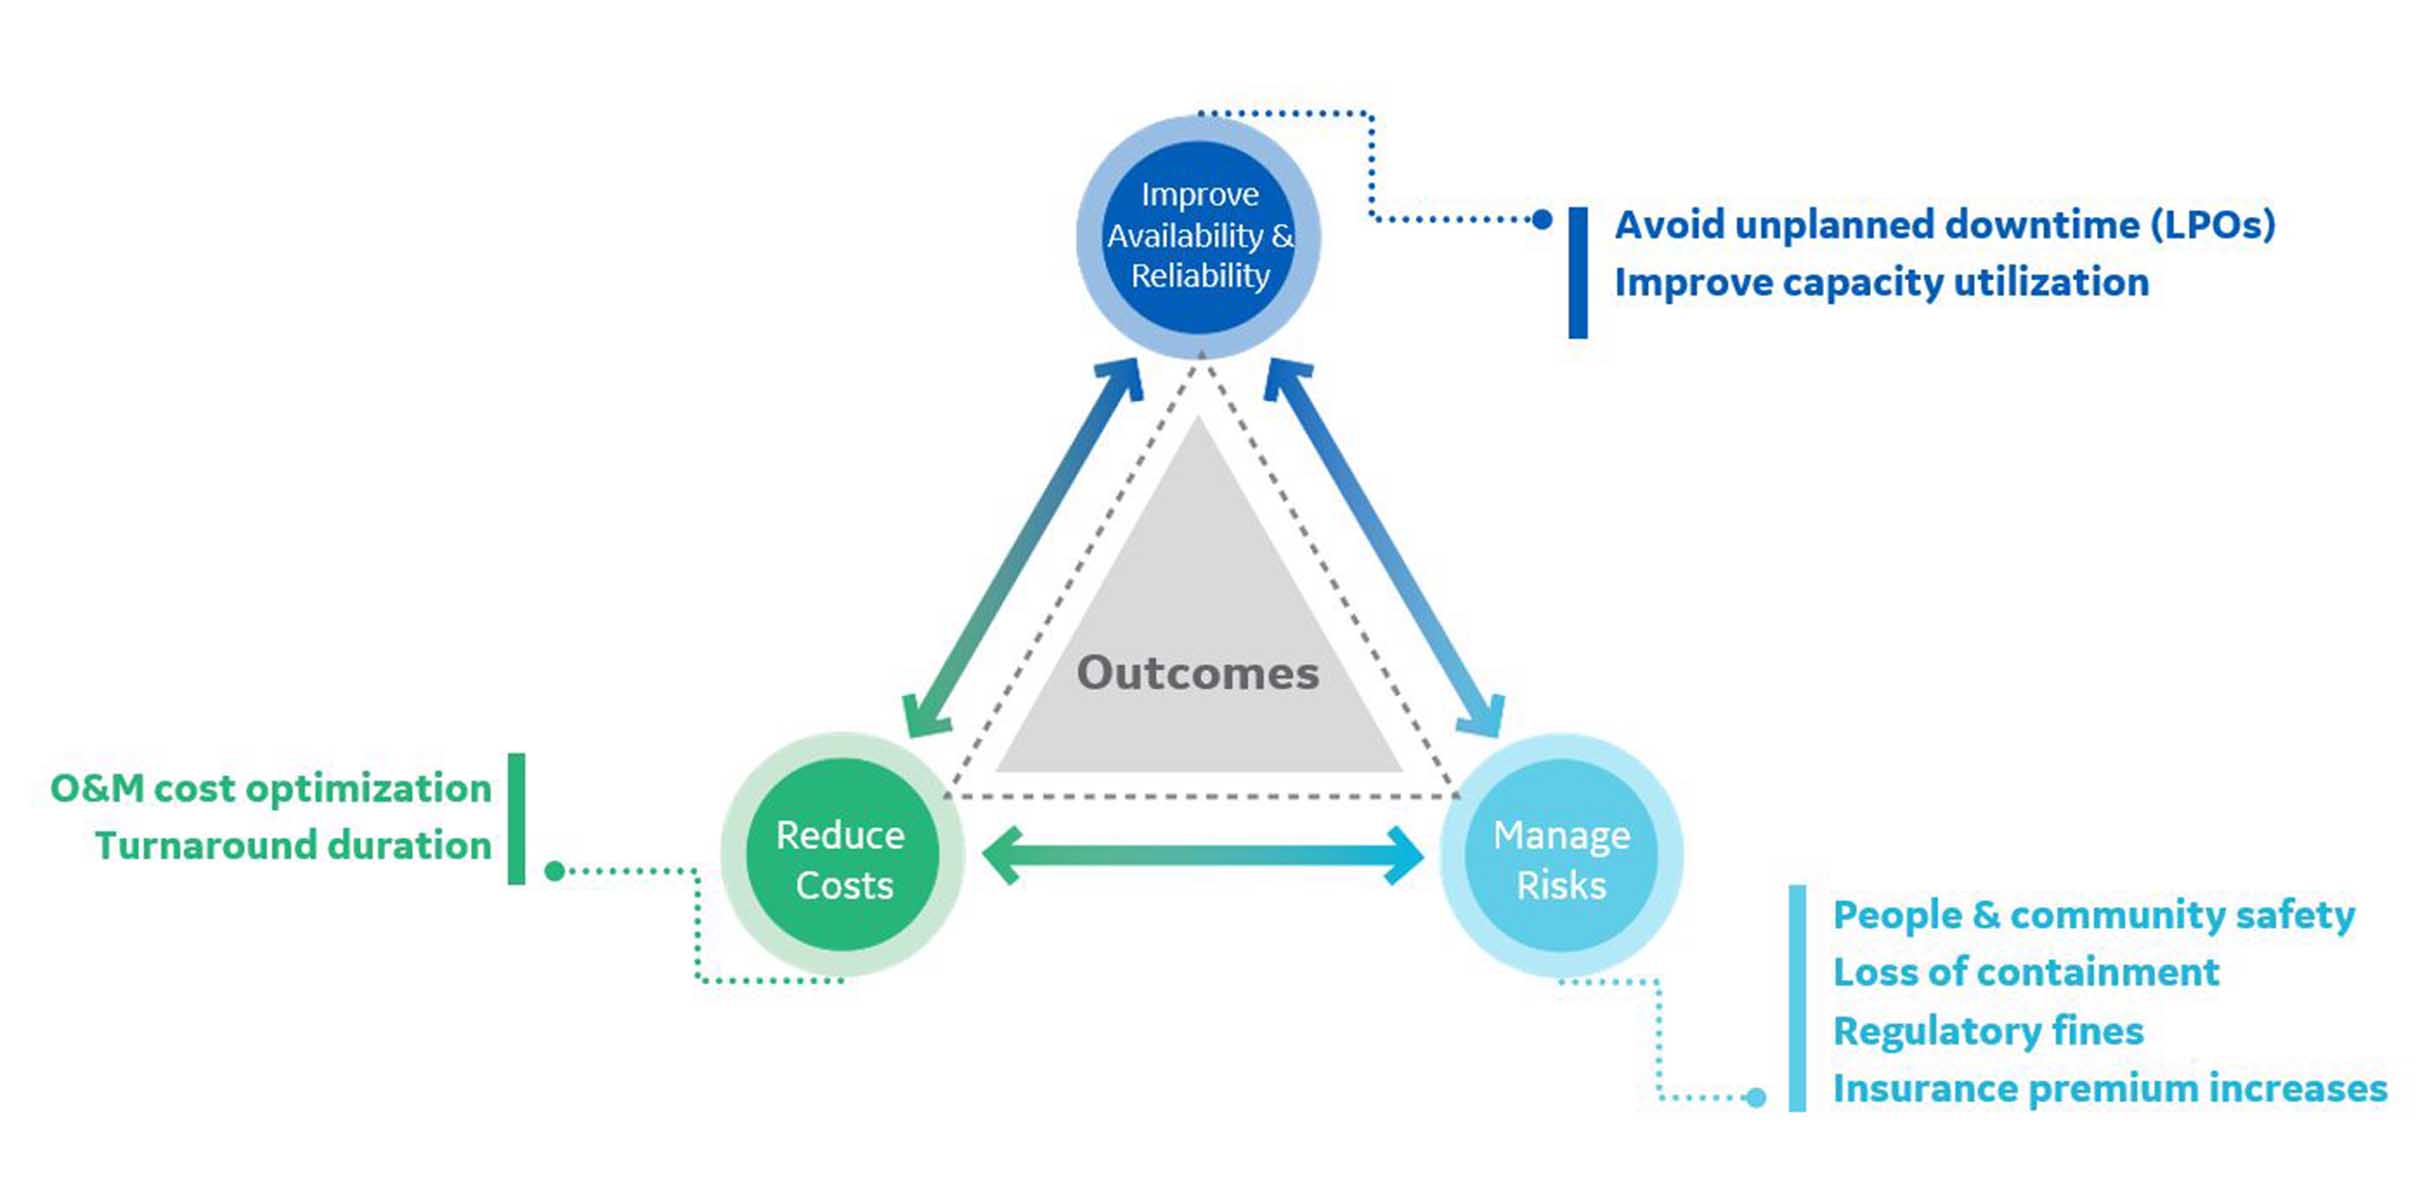 GE Digital’s APM maximizes customer outcomes by balancing traditionally competing priorities